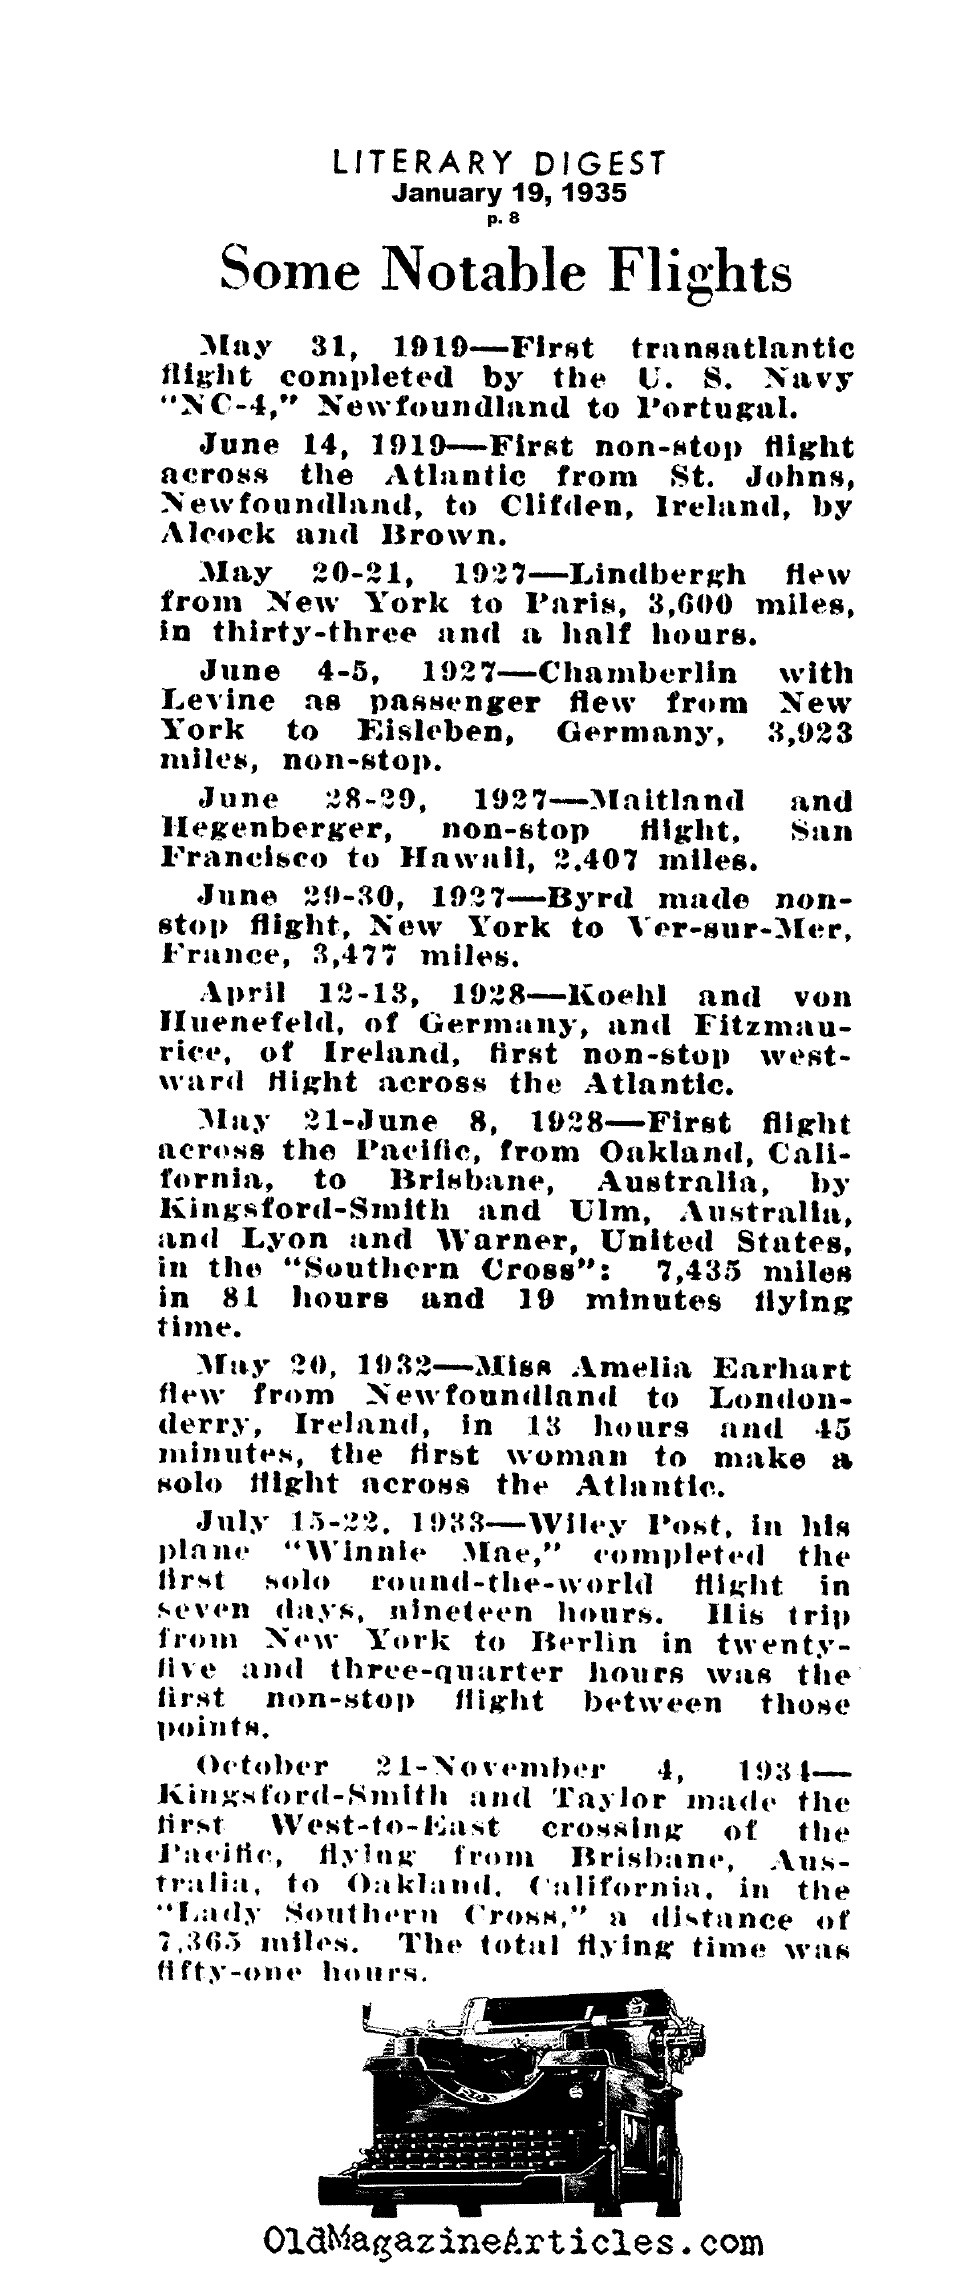 Notable Flights 1919 - 1931 (the Literary Digest, 1935)